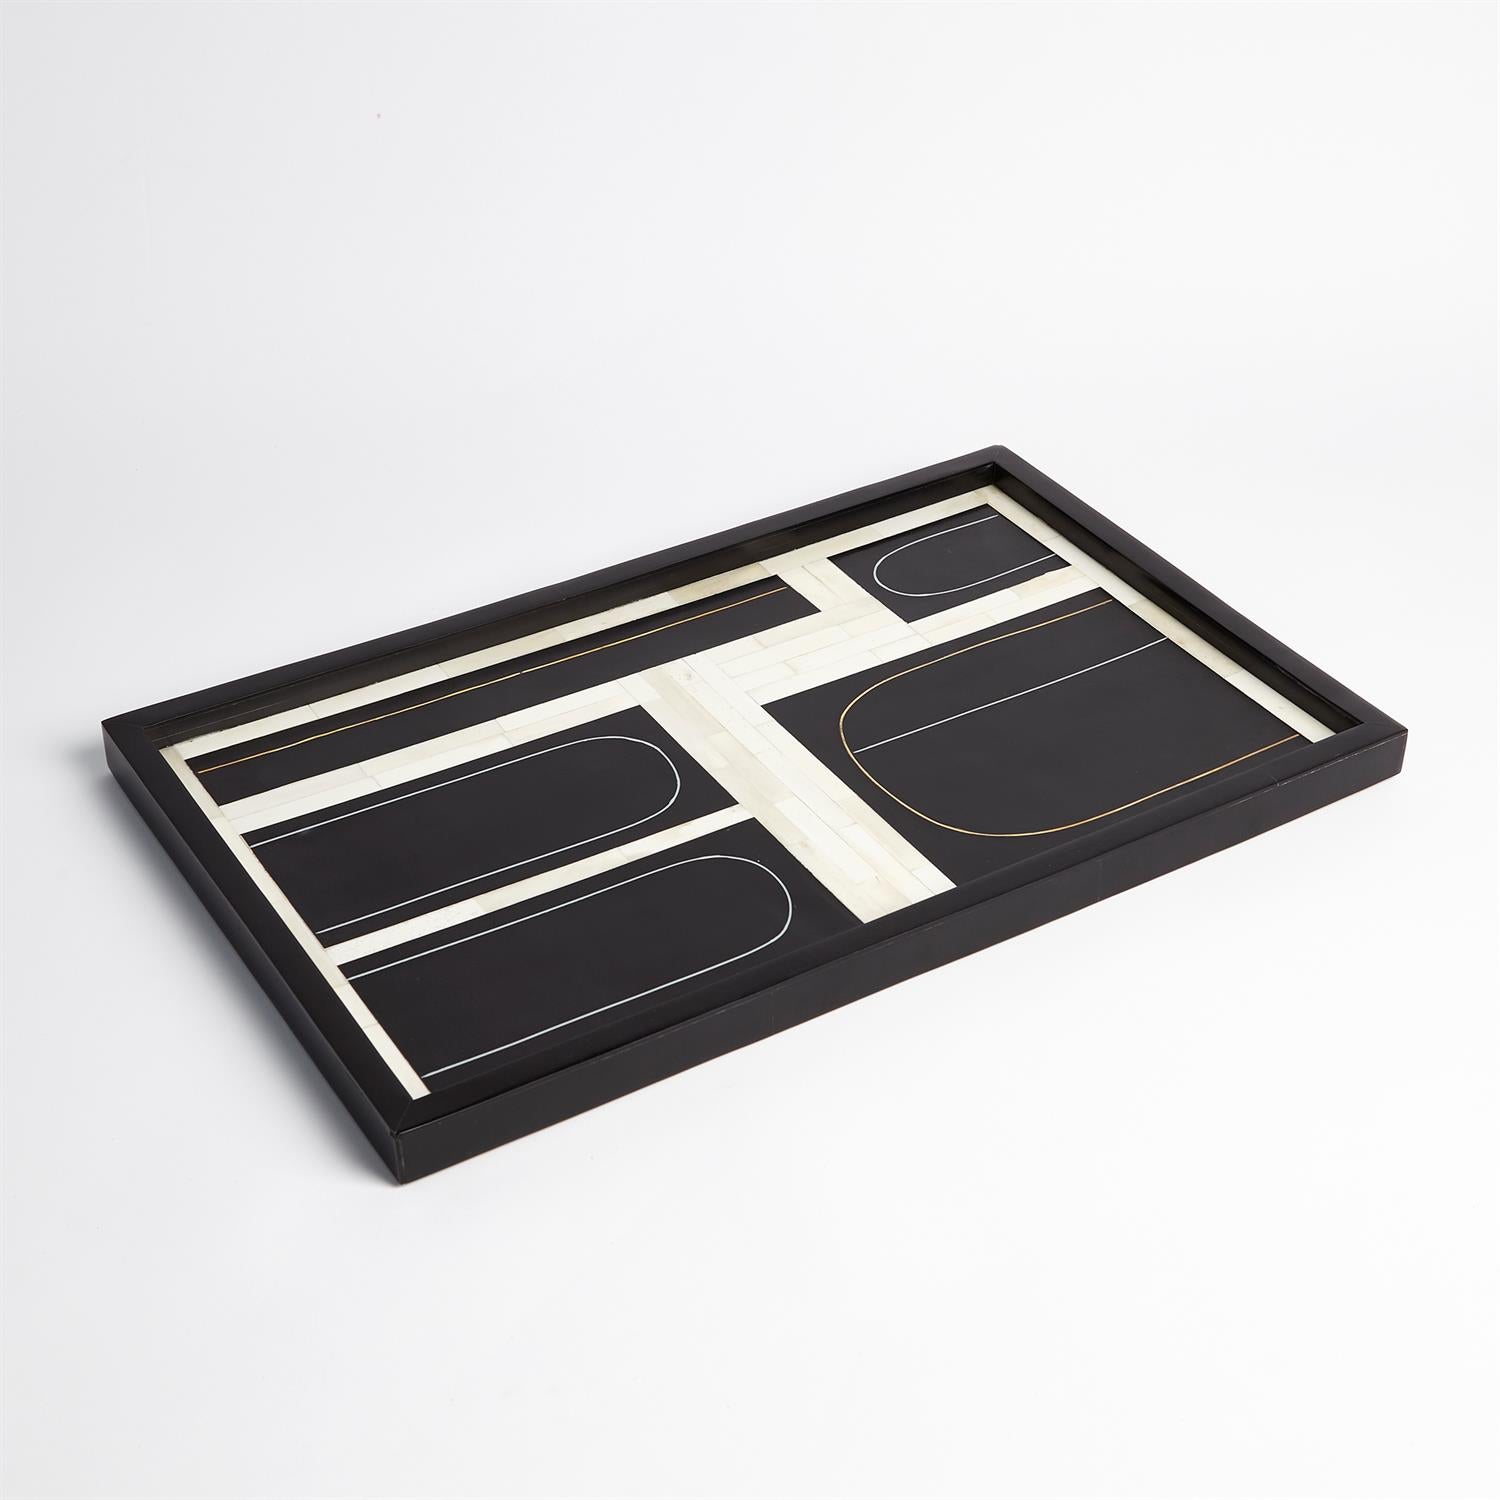 The Saffron Serving Tray - A chic The Saffron Serving Tray from GRACE BLU SHOPPE, perfect for entertaining or as a stylish decorative piece.